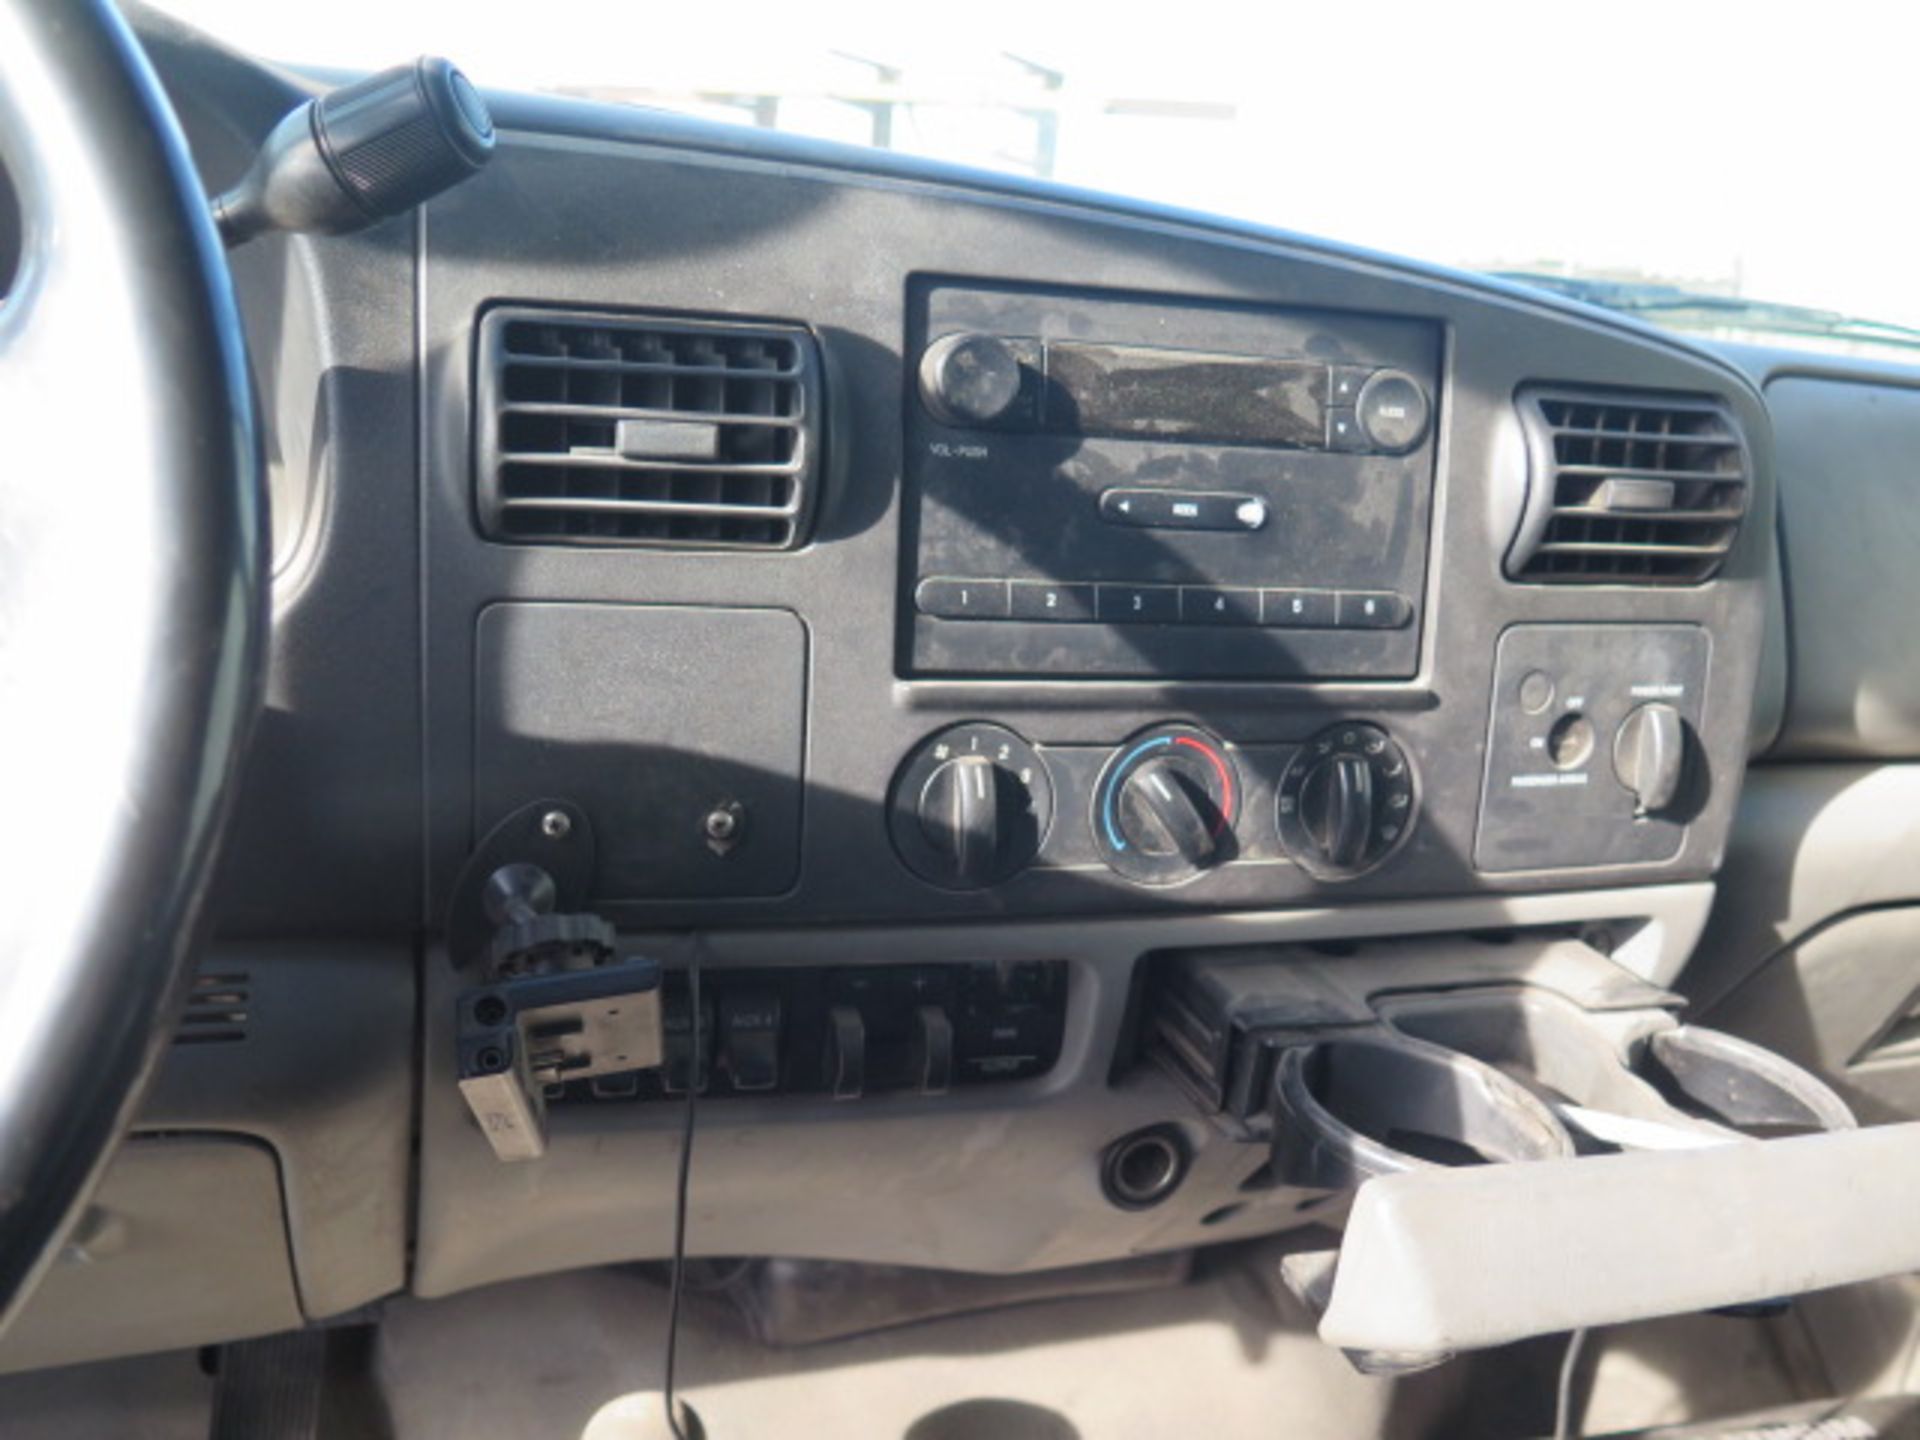 2012 Ford F-550 XL Super Duty 4X4 Service Welding Truck Lisc# 7W89113 w/ Turbo Diesel, SOLD AS IS - Image 33 of 42